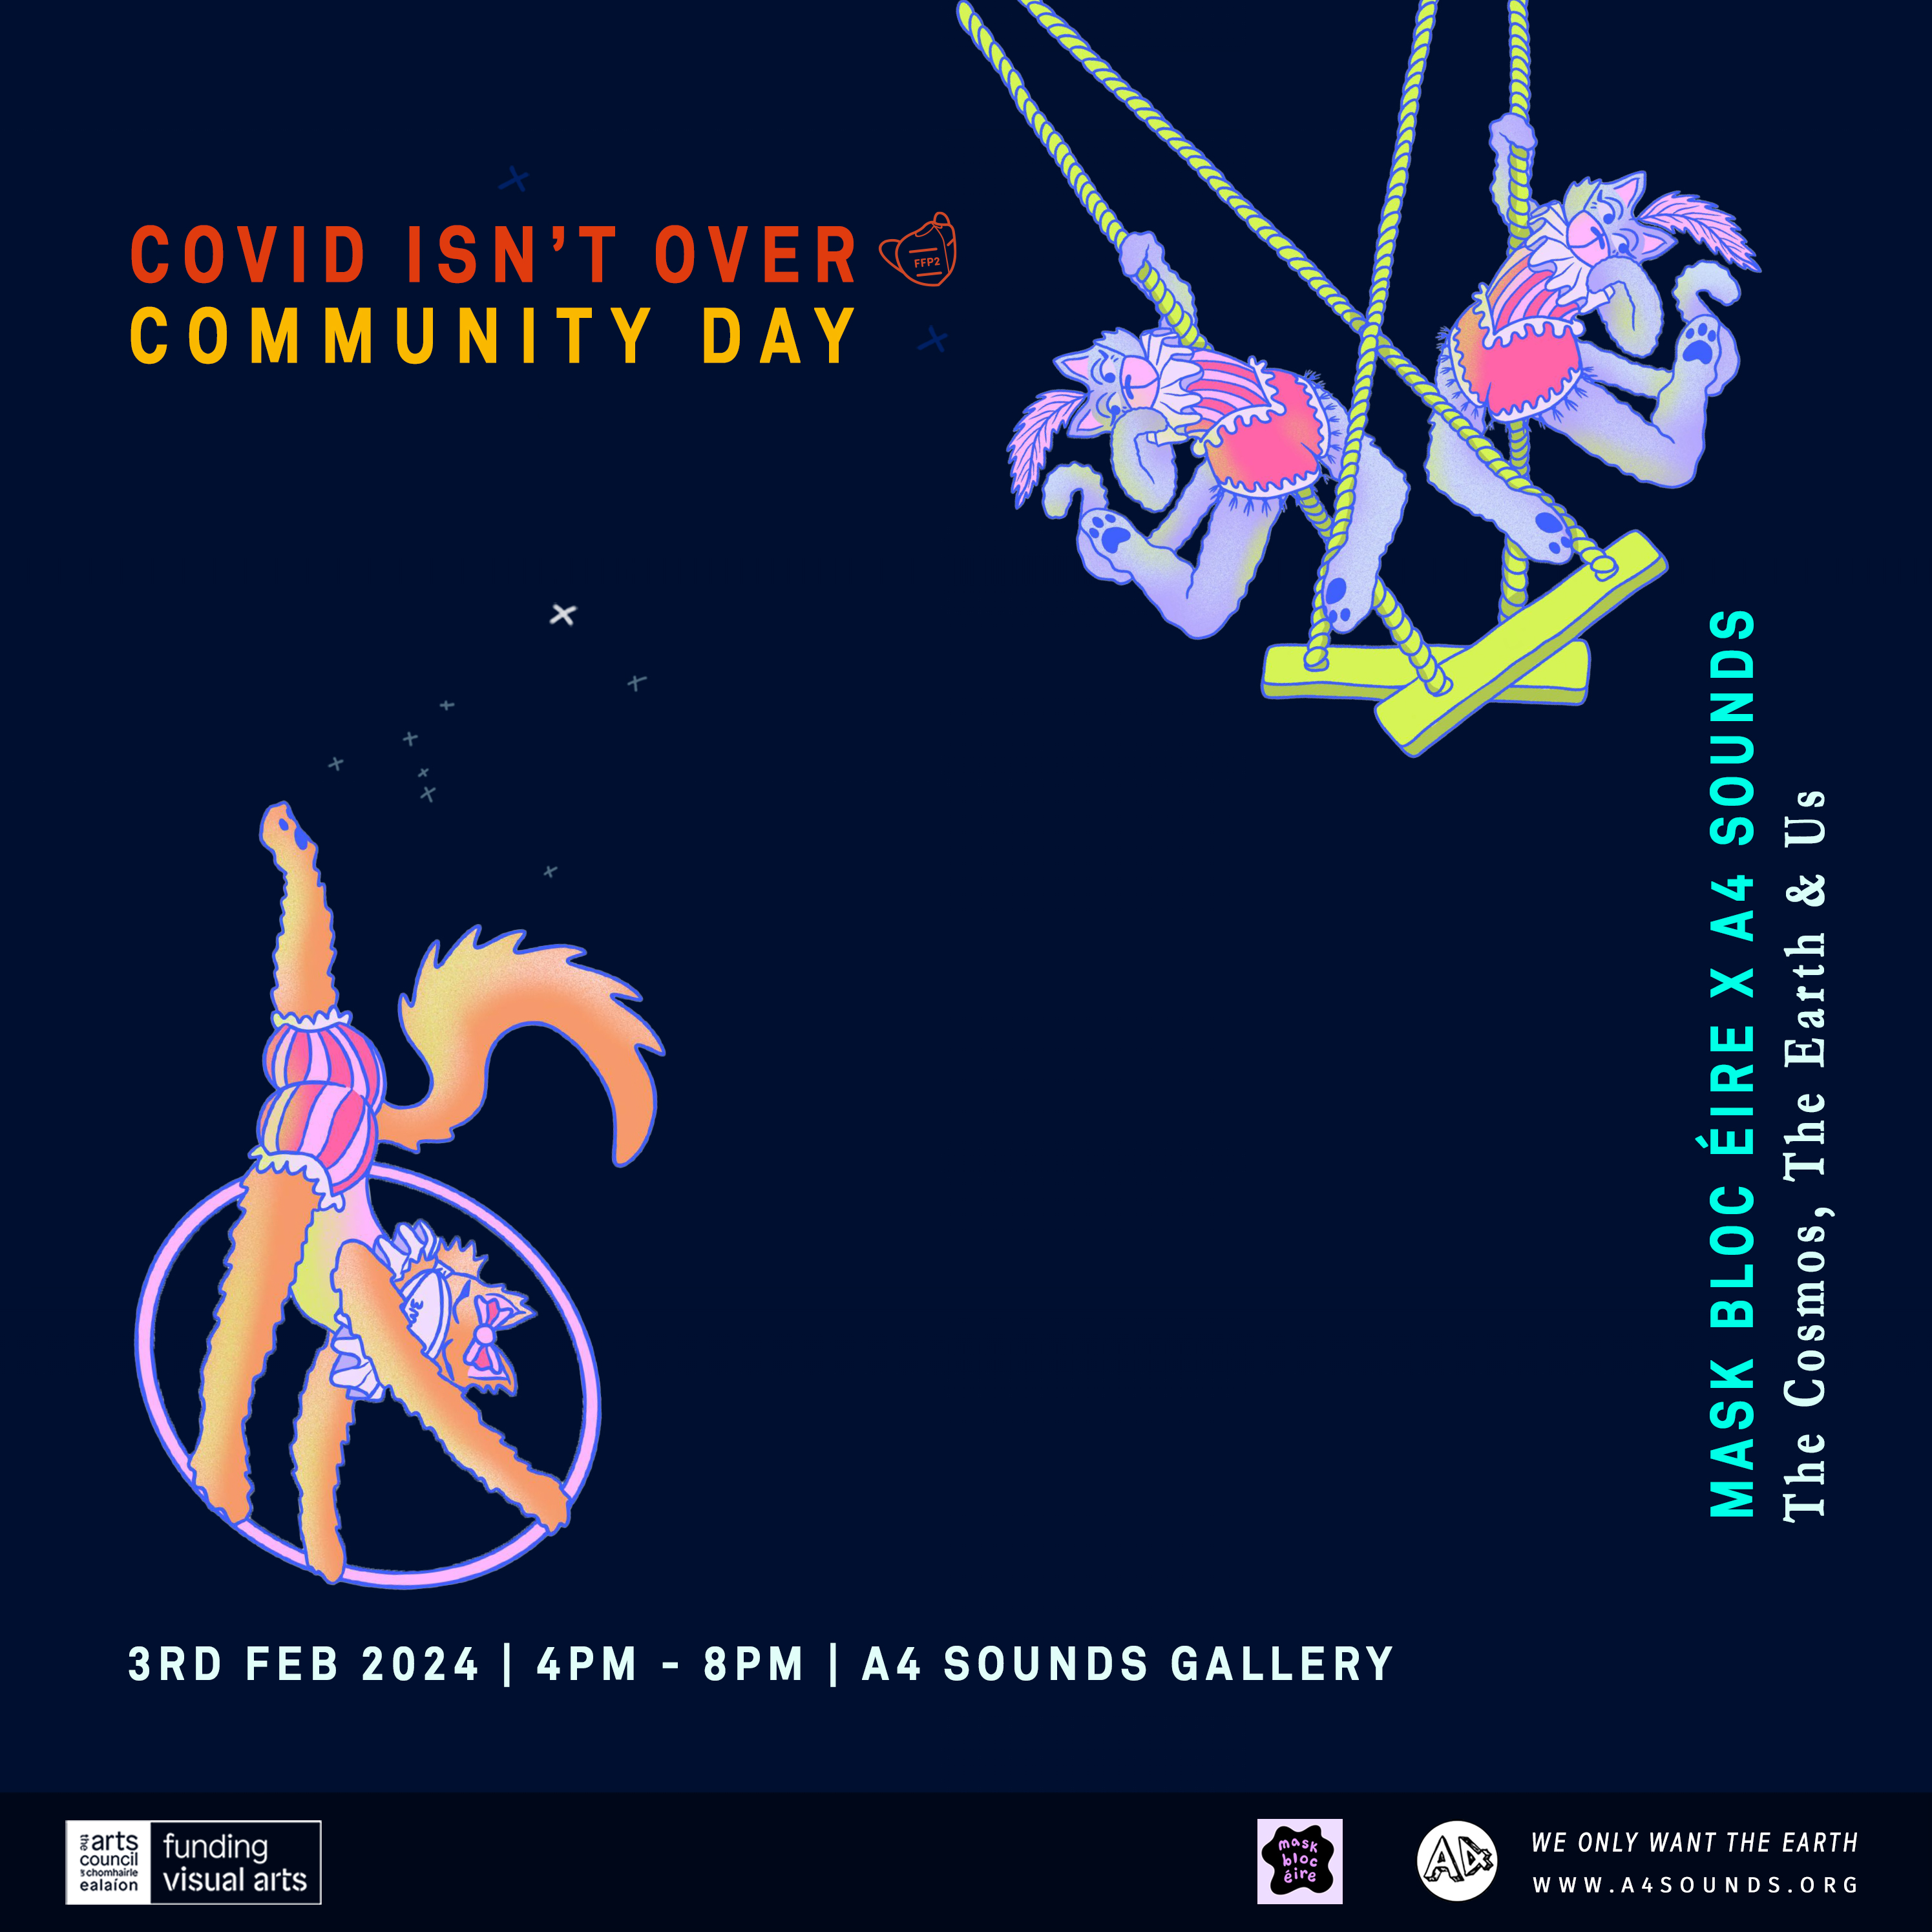 Poster for Covid Isn't Over Community Day. It is a square poster with digital hand drawings and block text. The background is dark navy like the night sky. There is a drawing of a cat doing circus acrobatics with a hoop in balloon shorts in the bottom left corner. The cat appears to be kicking a star constellation with its foot towards two other cats also doing circus acrobatics on swings. The illustrations are in muted purple pink and orange colours. The text along the top reads: Covid isnt over. Community Day. Along the right hand side there is vertical text which reads mask bloc éire x a4 sounds. The Cosmos, The Earth & Us. Along the bottom there is text that reads: Sat 3rd Feb. 4pm - 8pm. A4 Sounds Gallery.